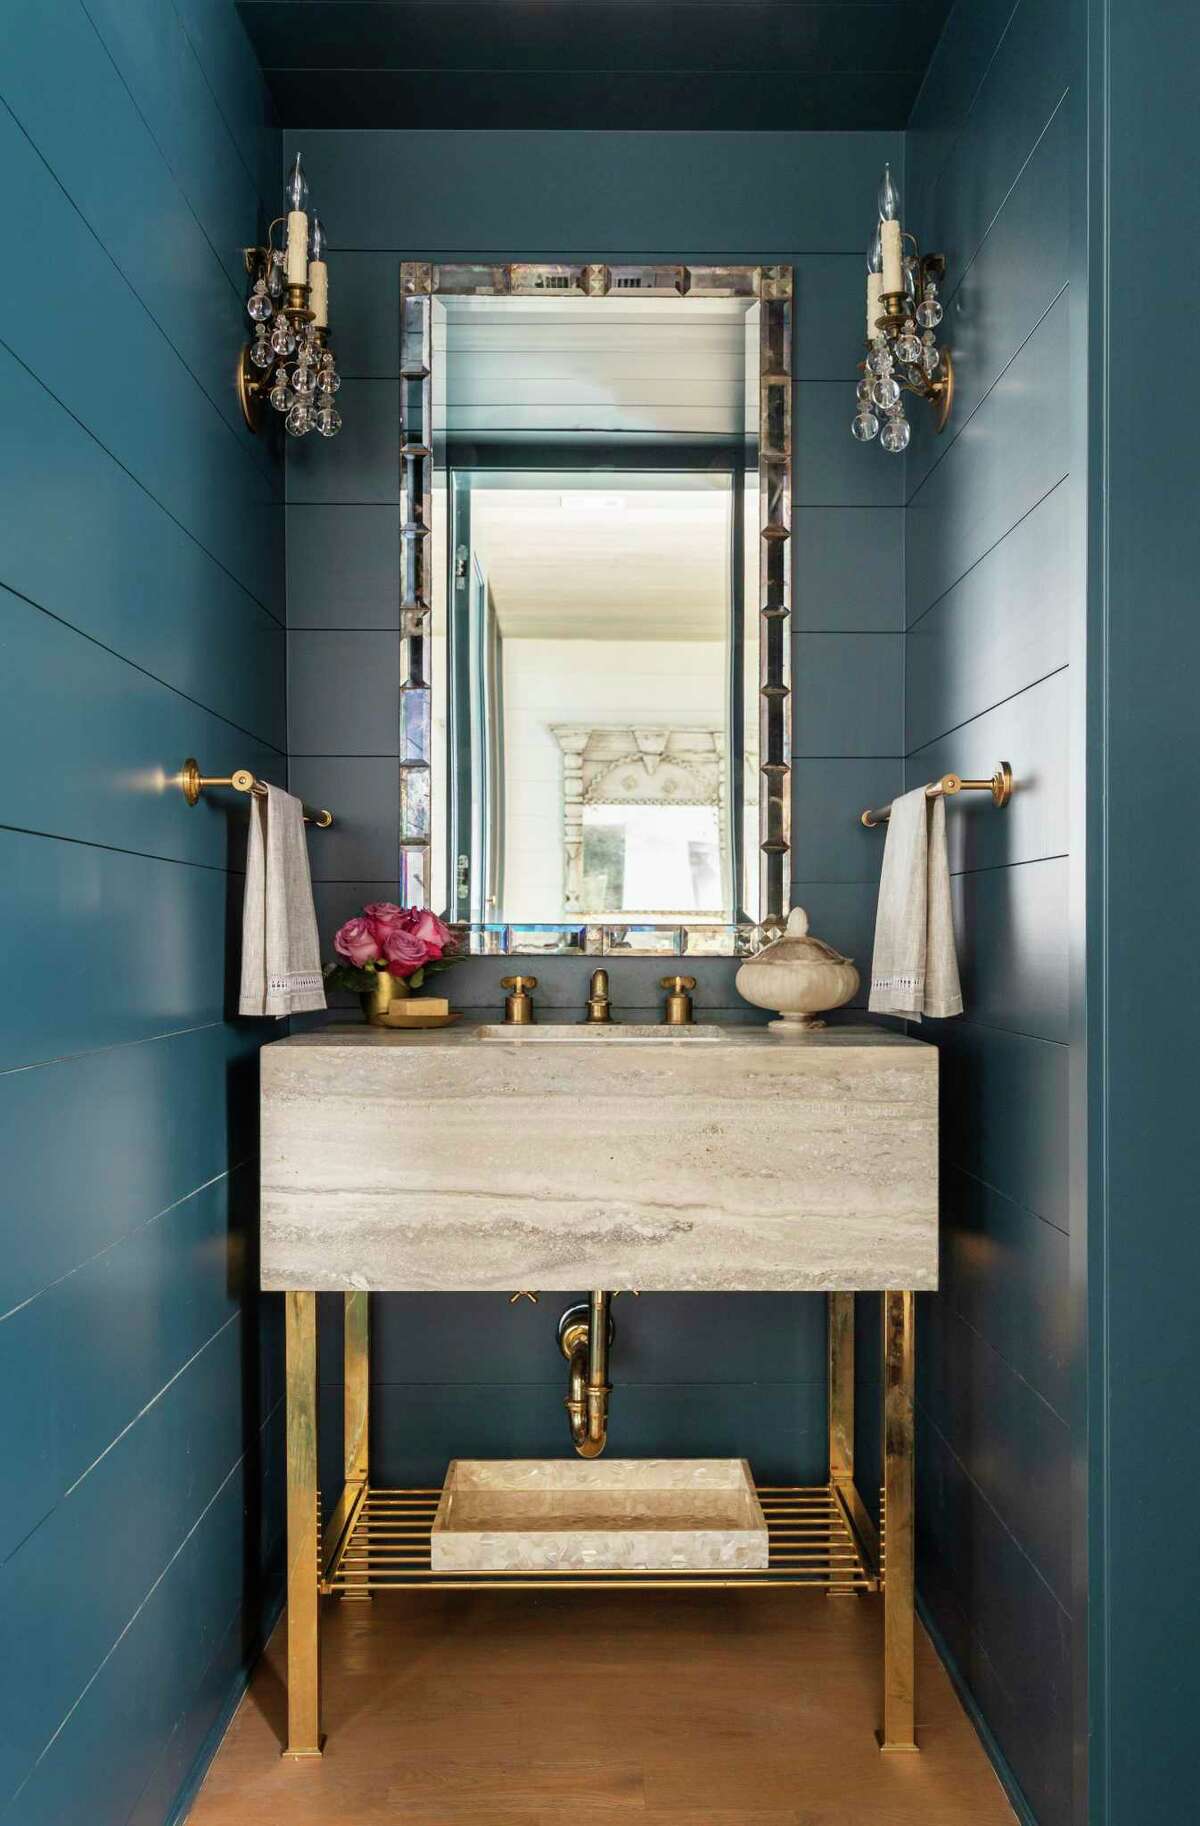 Having a signature, or distinctive, look is part of decorating your home to your personality, says Eyles. This powder/ bathroom was painted teal and outfitted with a marble vanity on a gold-leafed metal base. Sconces and a distinctive mirror finish the look. It was designed by Eyles.